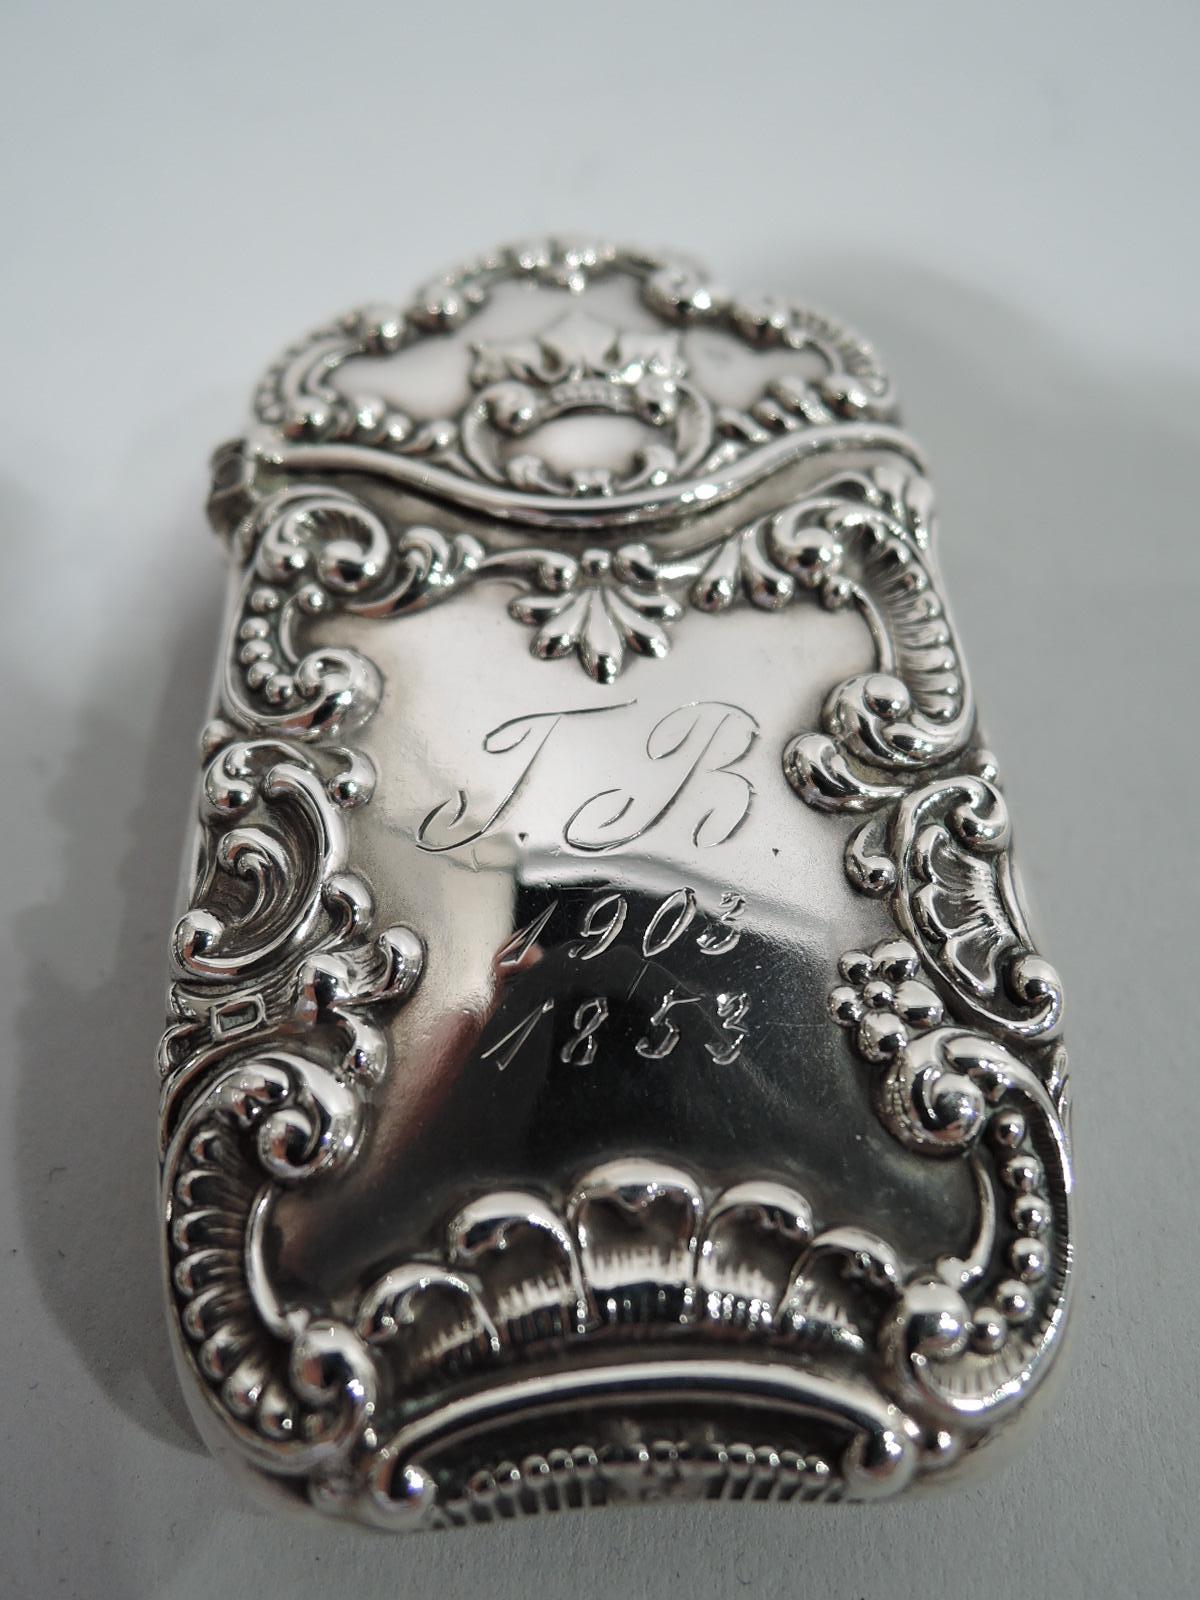 Turn of the century American Victorian sterling silver vesta case. Rectilinear with gently curved sides and shaped and hinged cover. Double-sided ornament with applied scrolls and shells; at top a regal crown. One side engraved with script initials